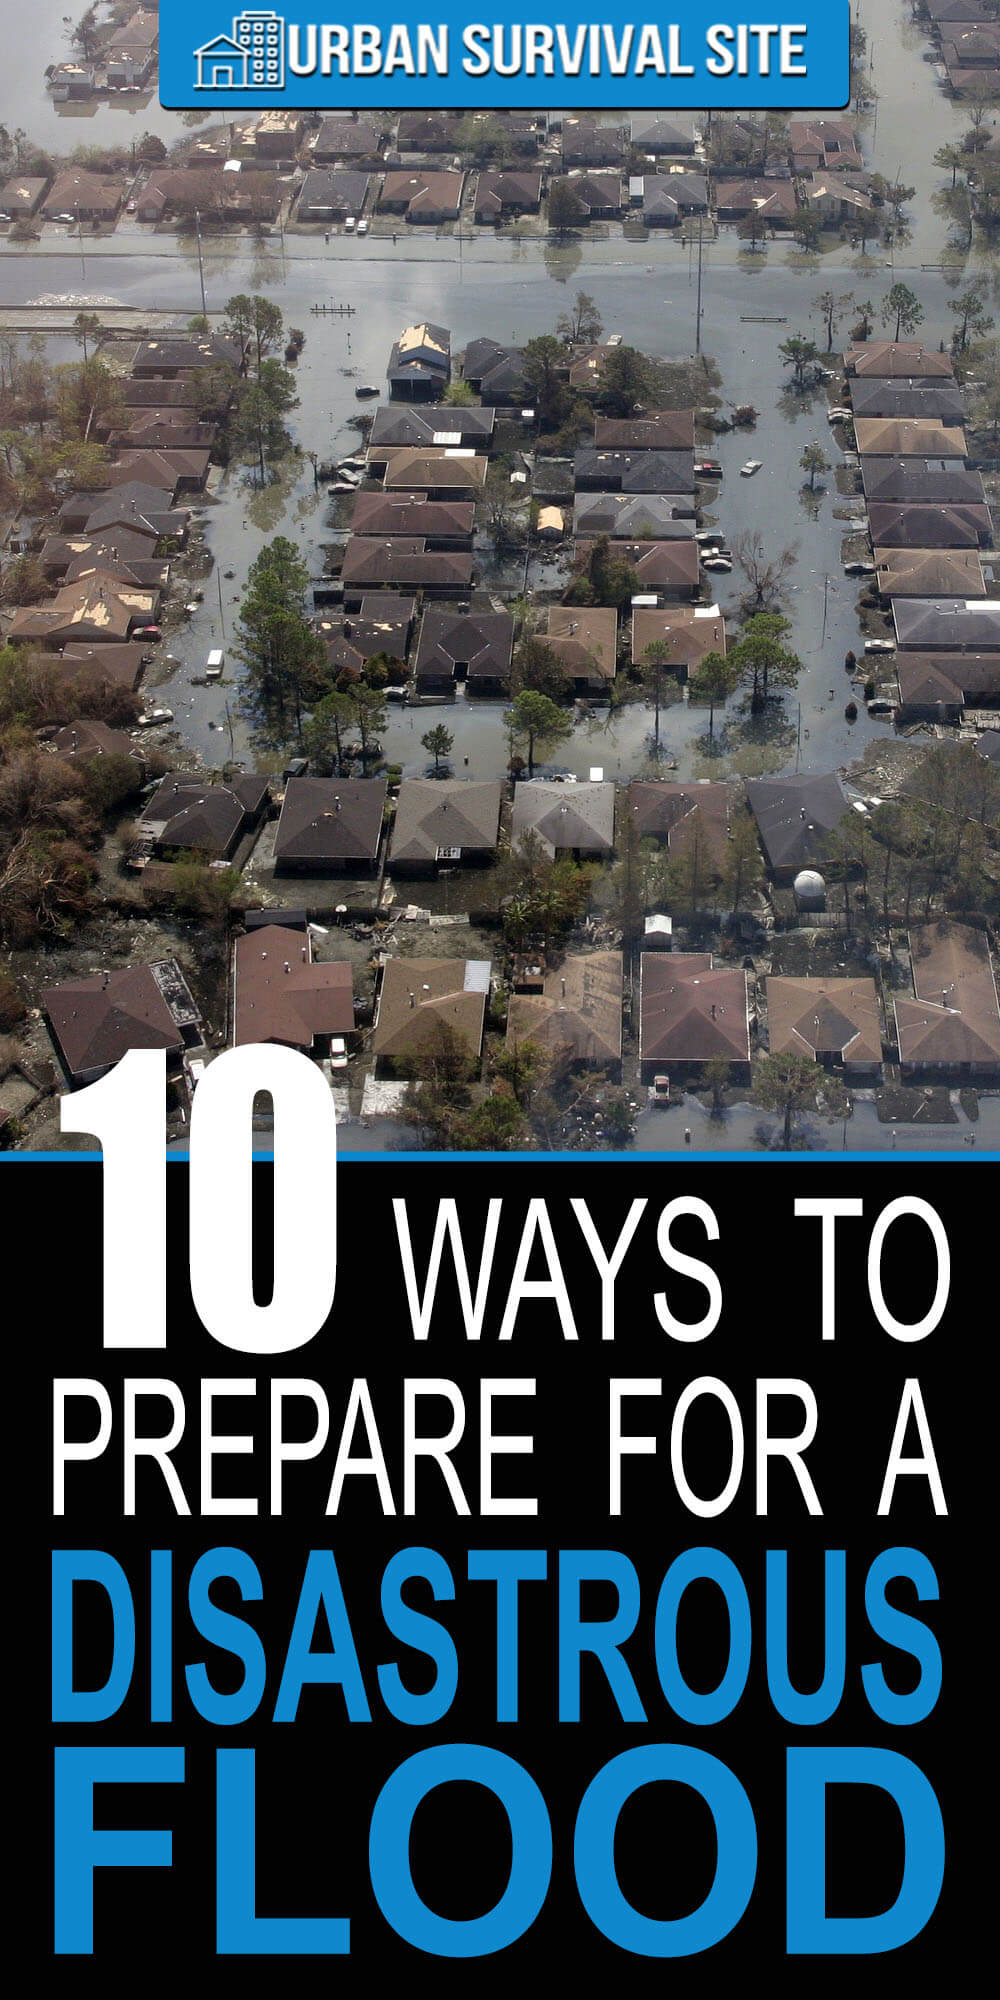 10 Ways To Prepare For A Disastrous Flood